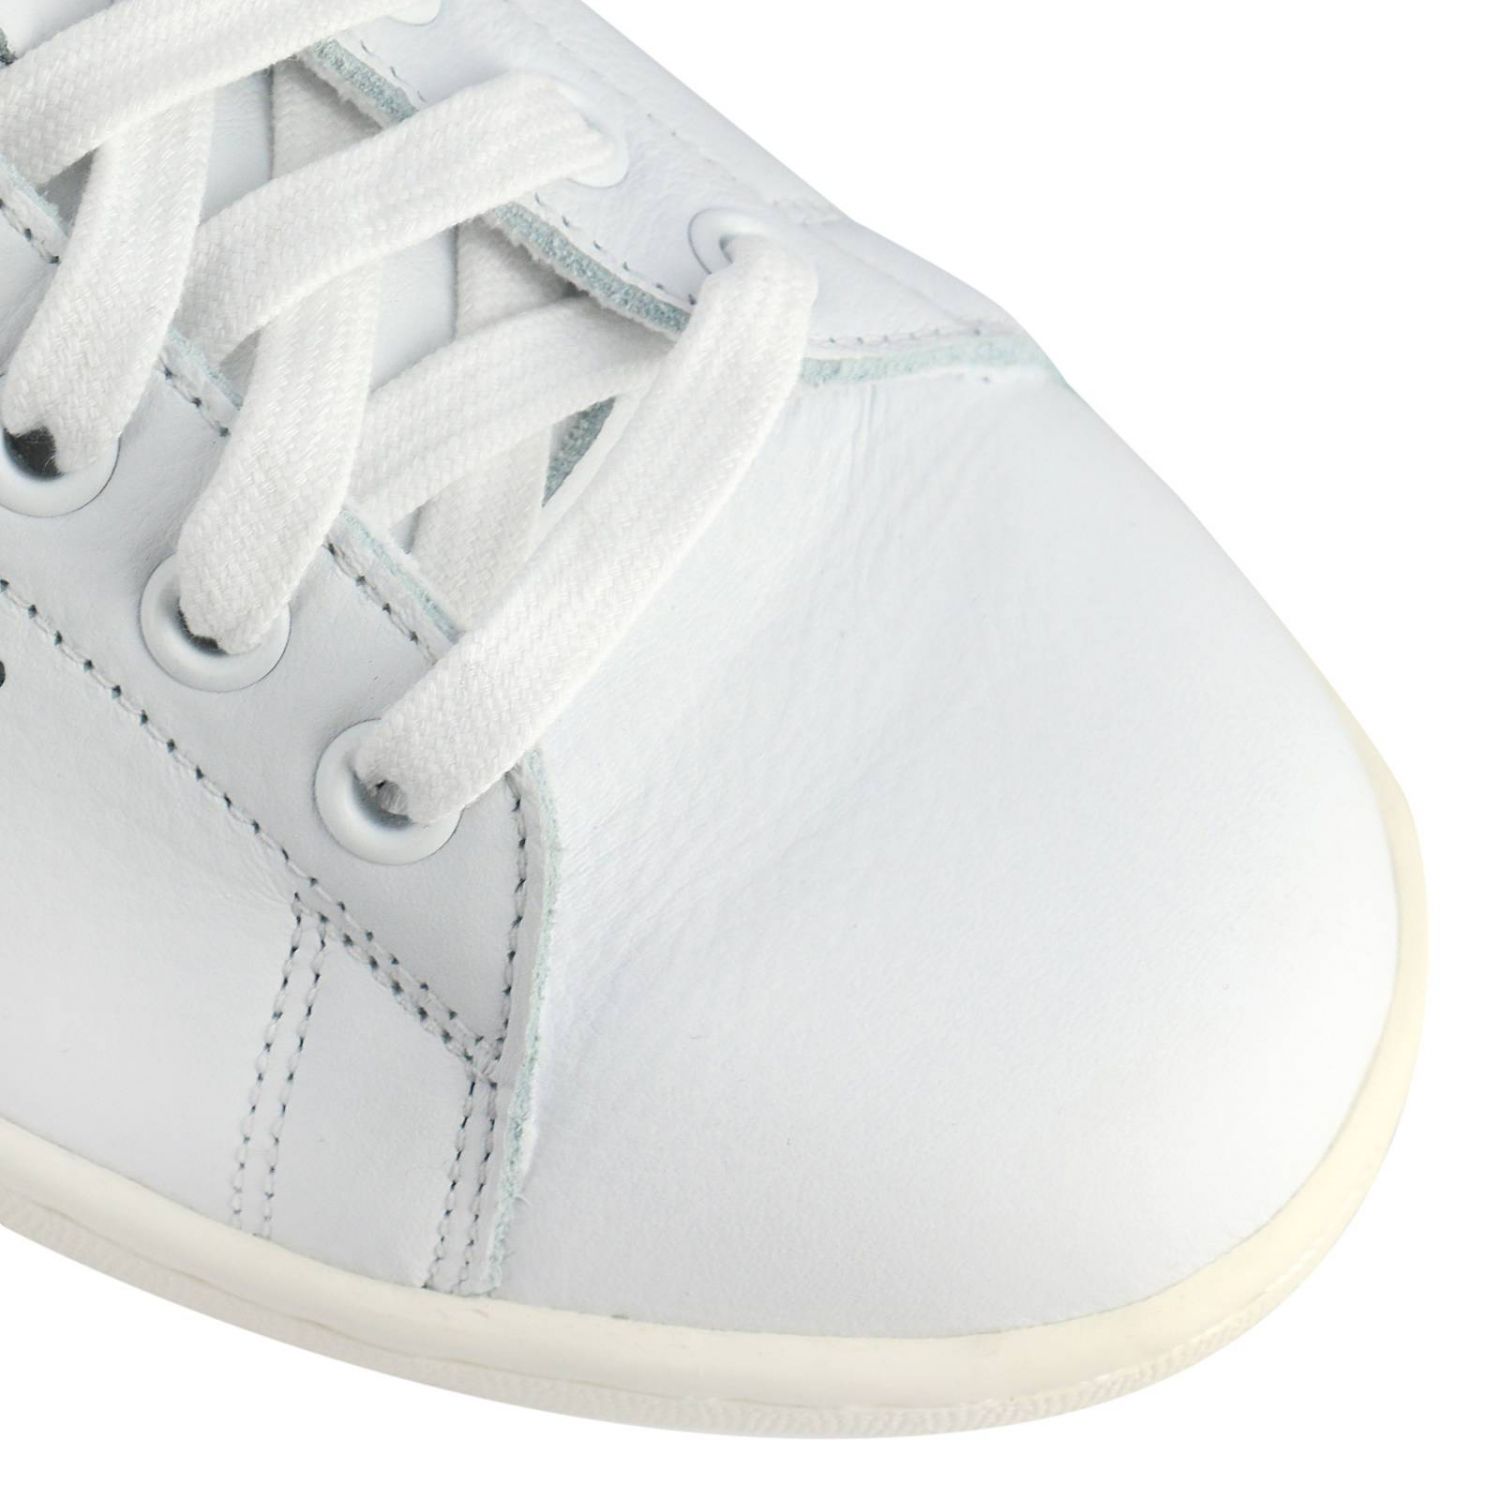 Adidas Originals Outlet: Stan Smith men's sneakers in smooth leather ...